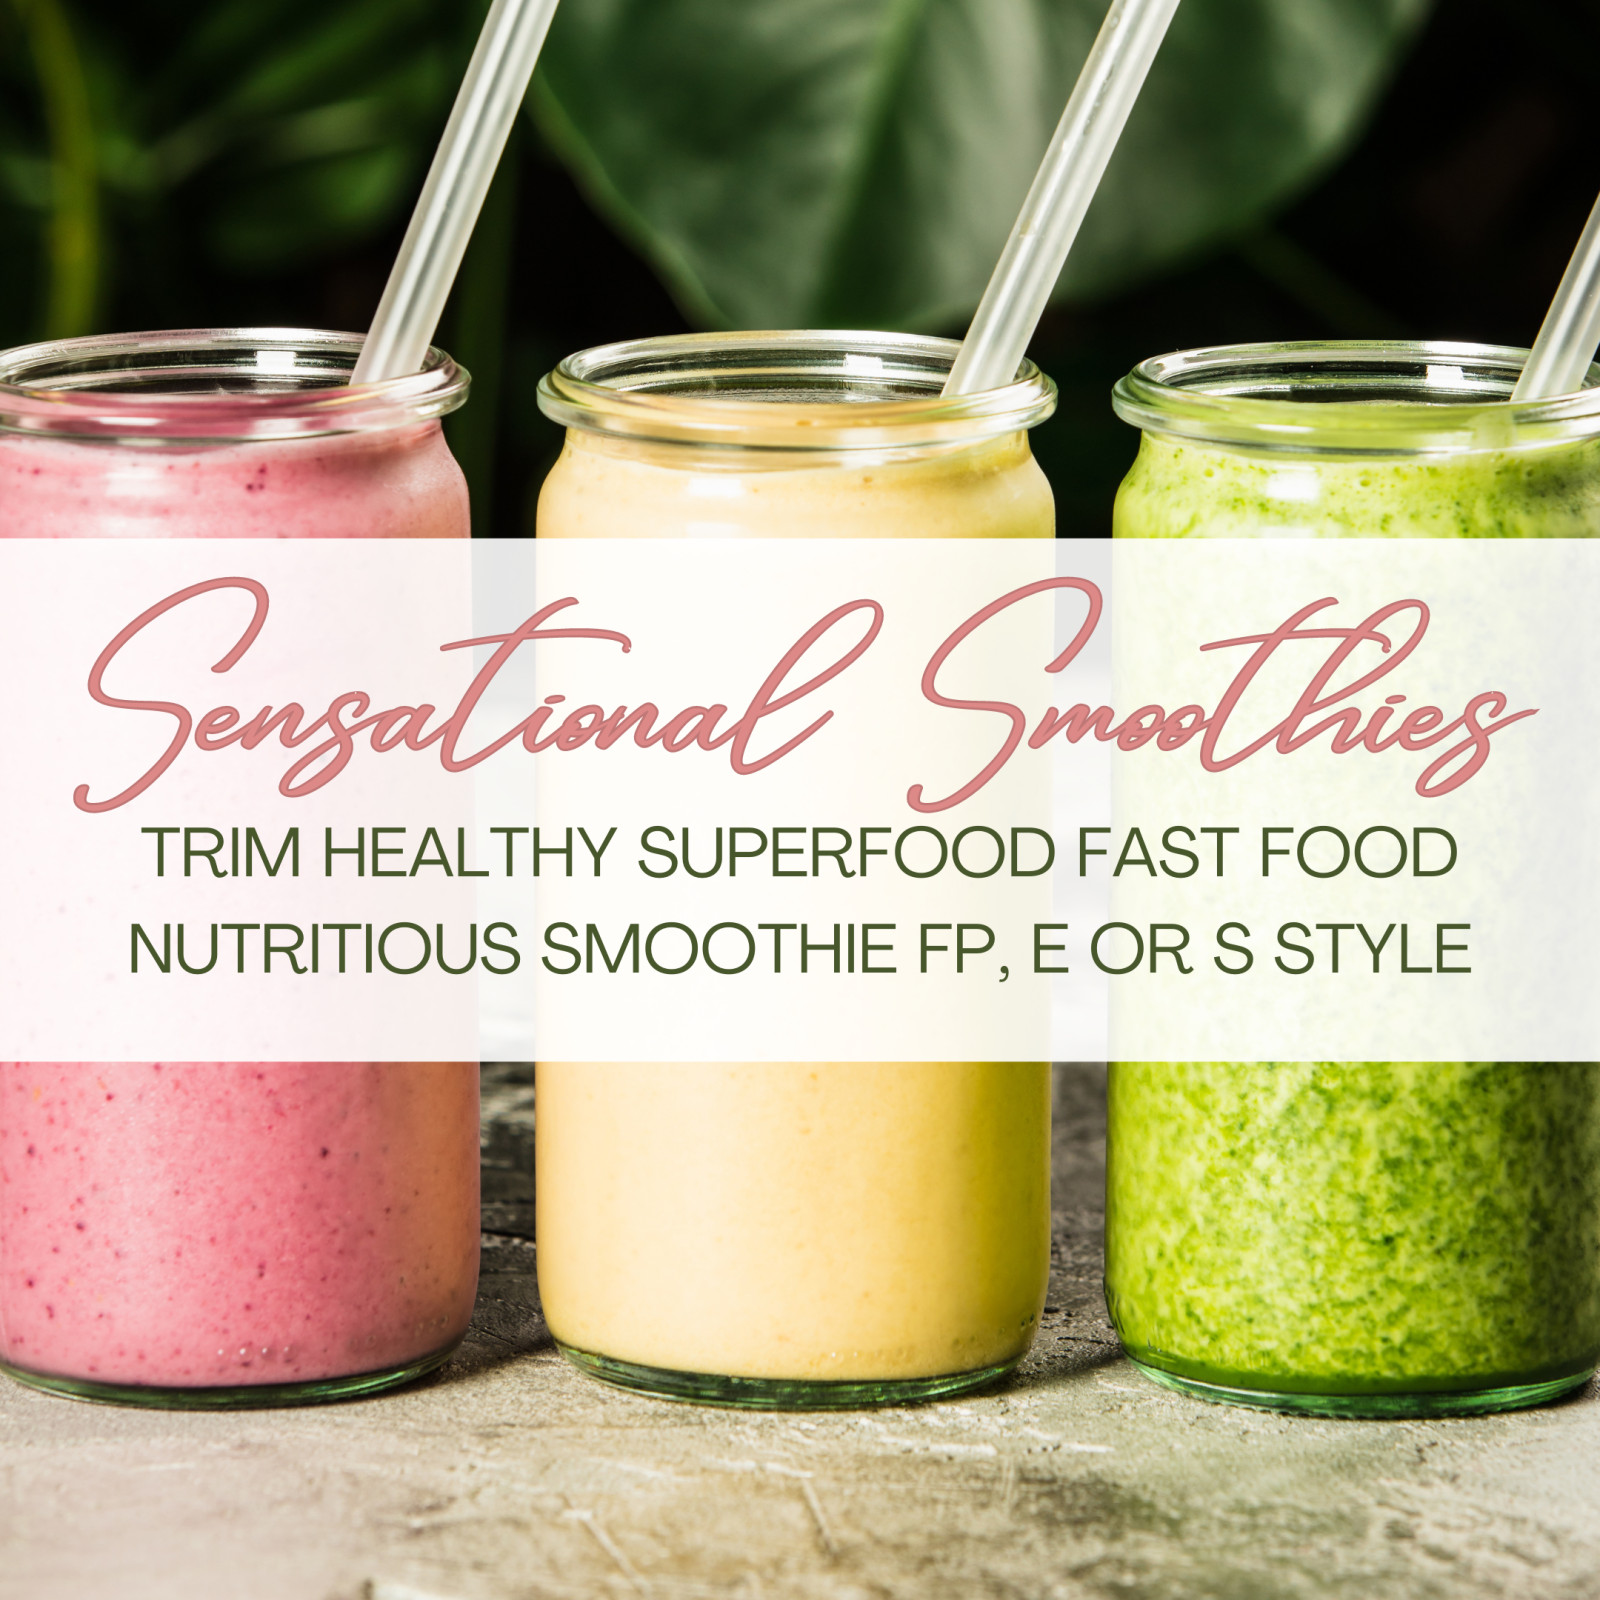 Sensational Smoothies: Trim Healthy Superfood Fast Food Nutritious Smoothie FP, E or S style